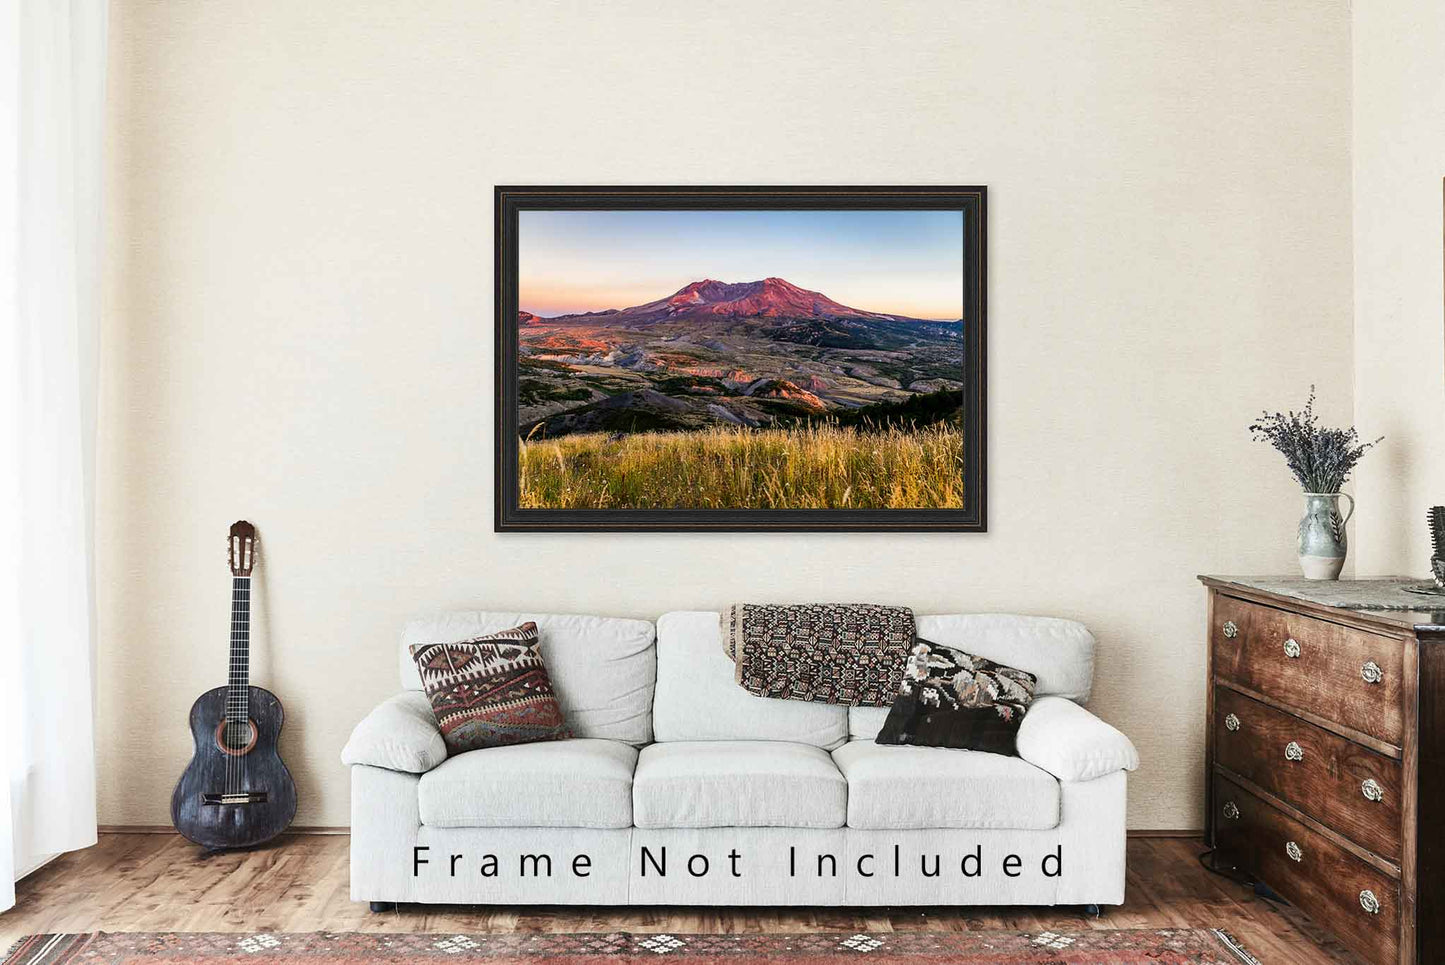 Pacific Northwest Photography Print - Picture of Mount St. Helens at Sunset in Washington State Volcano Photo Wall Art Decor Artwork